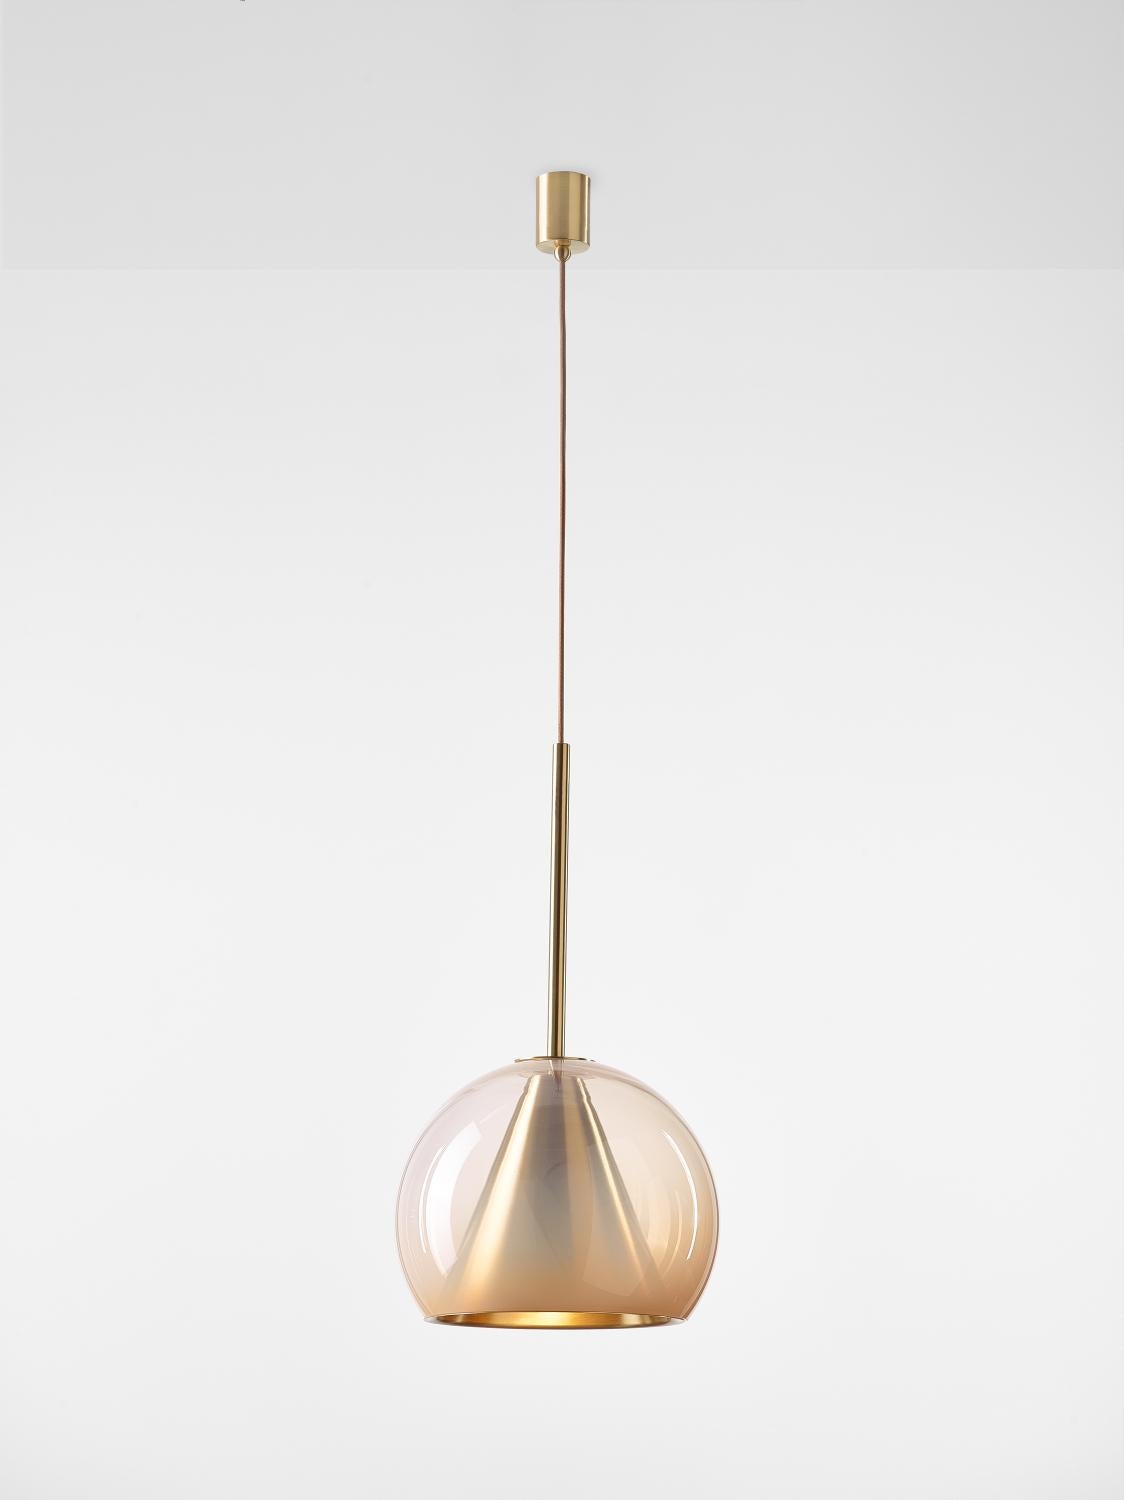 Big Neutral Nude Kono Pendant Light by Dechem Studio
Dimensions: D 35 x H 75 cm
Materials: brass, glass.
Also available: different finishes and colours available.

This collection of suspended light fixtures combines the elementary geometric